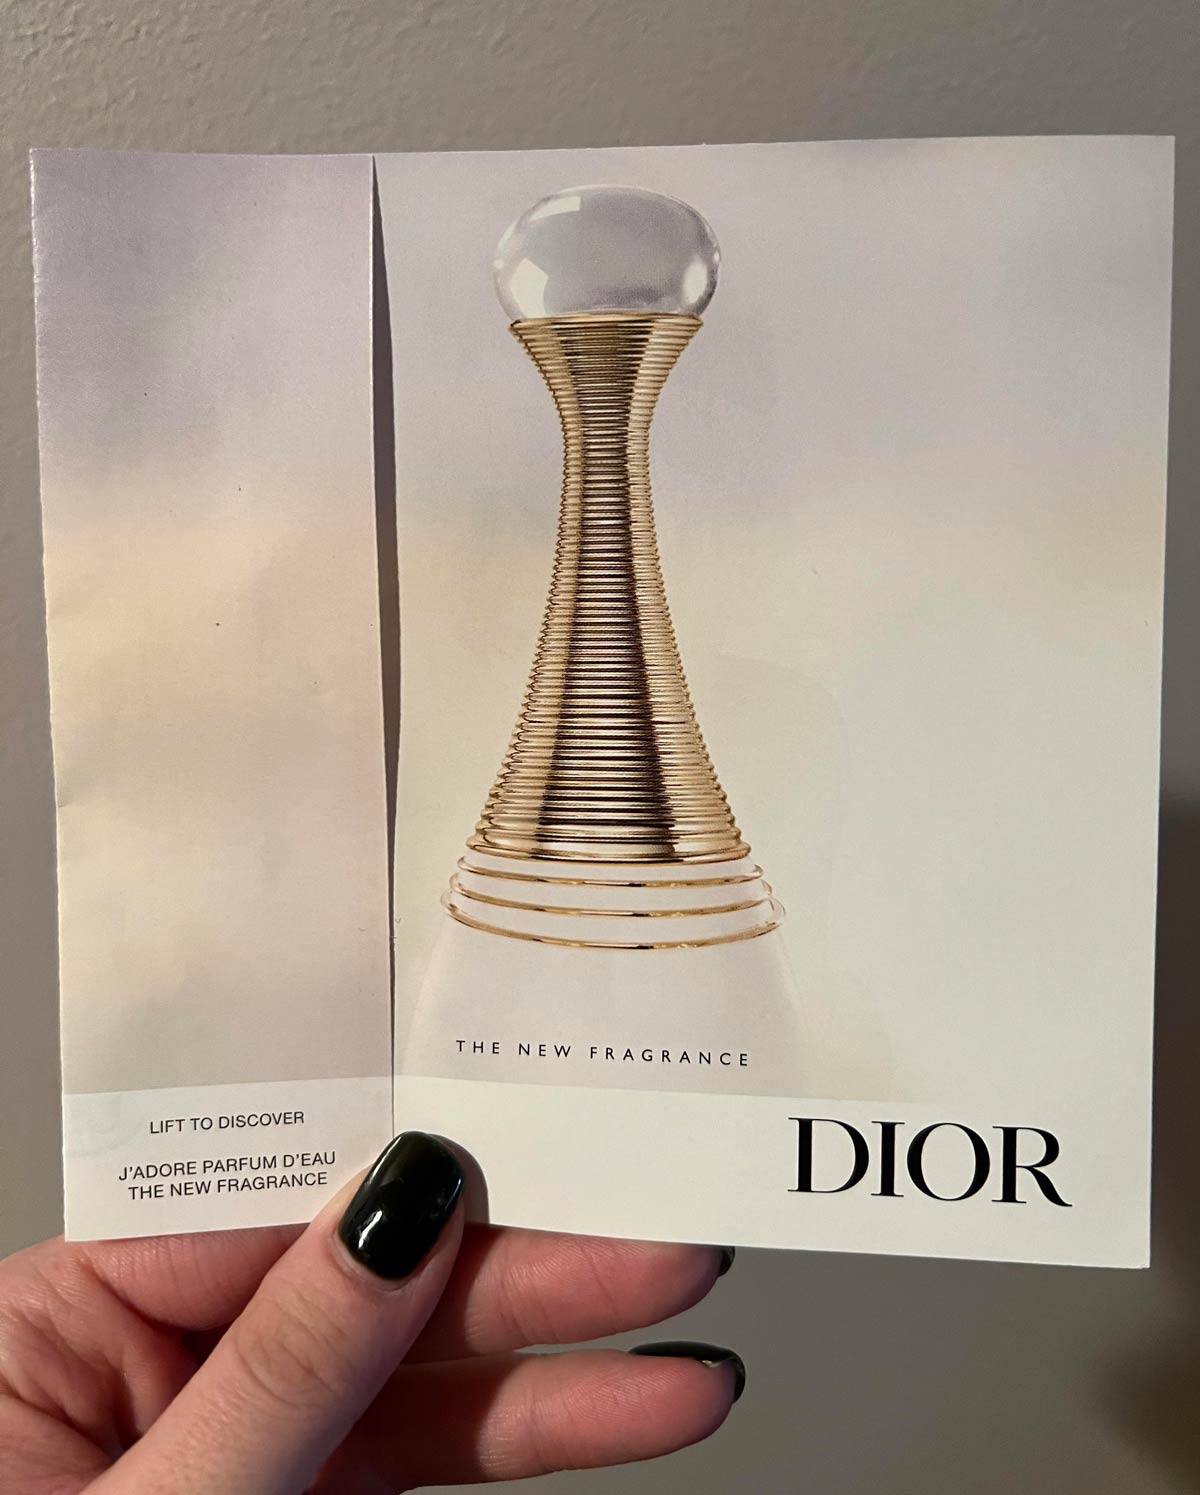 This perfume looks like a door stop. Or should I say, Dior stop?